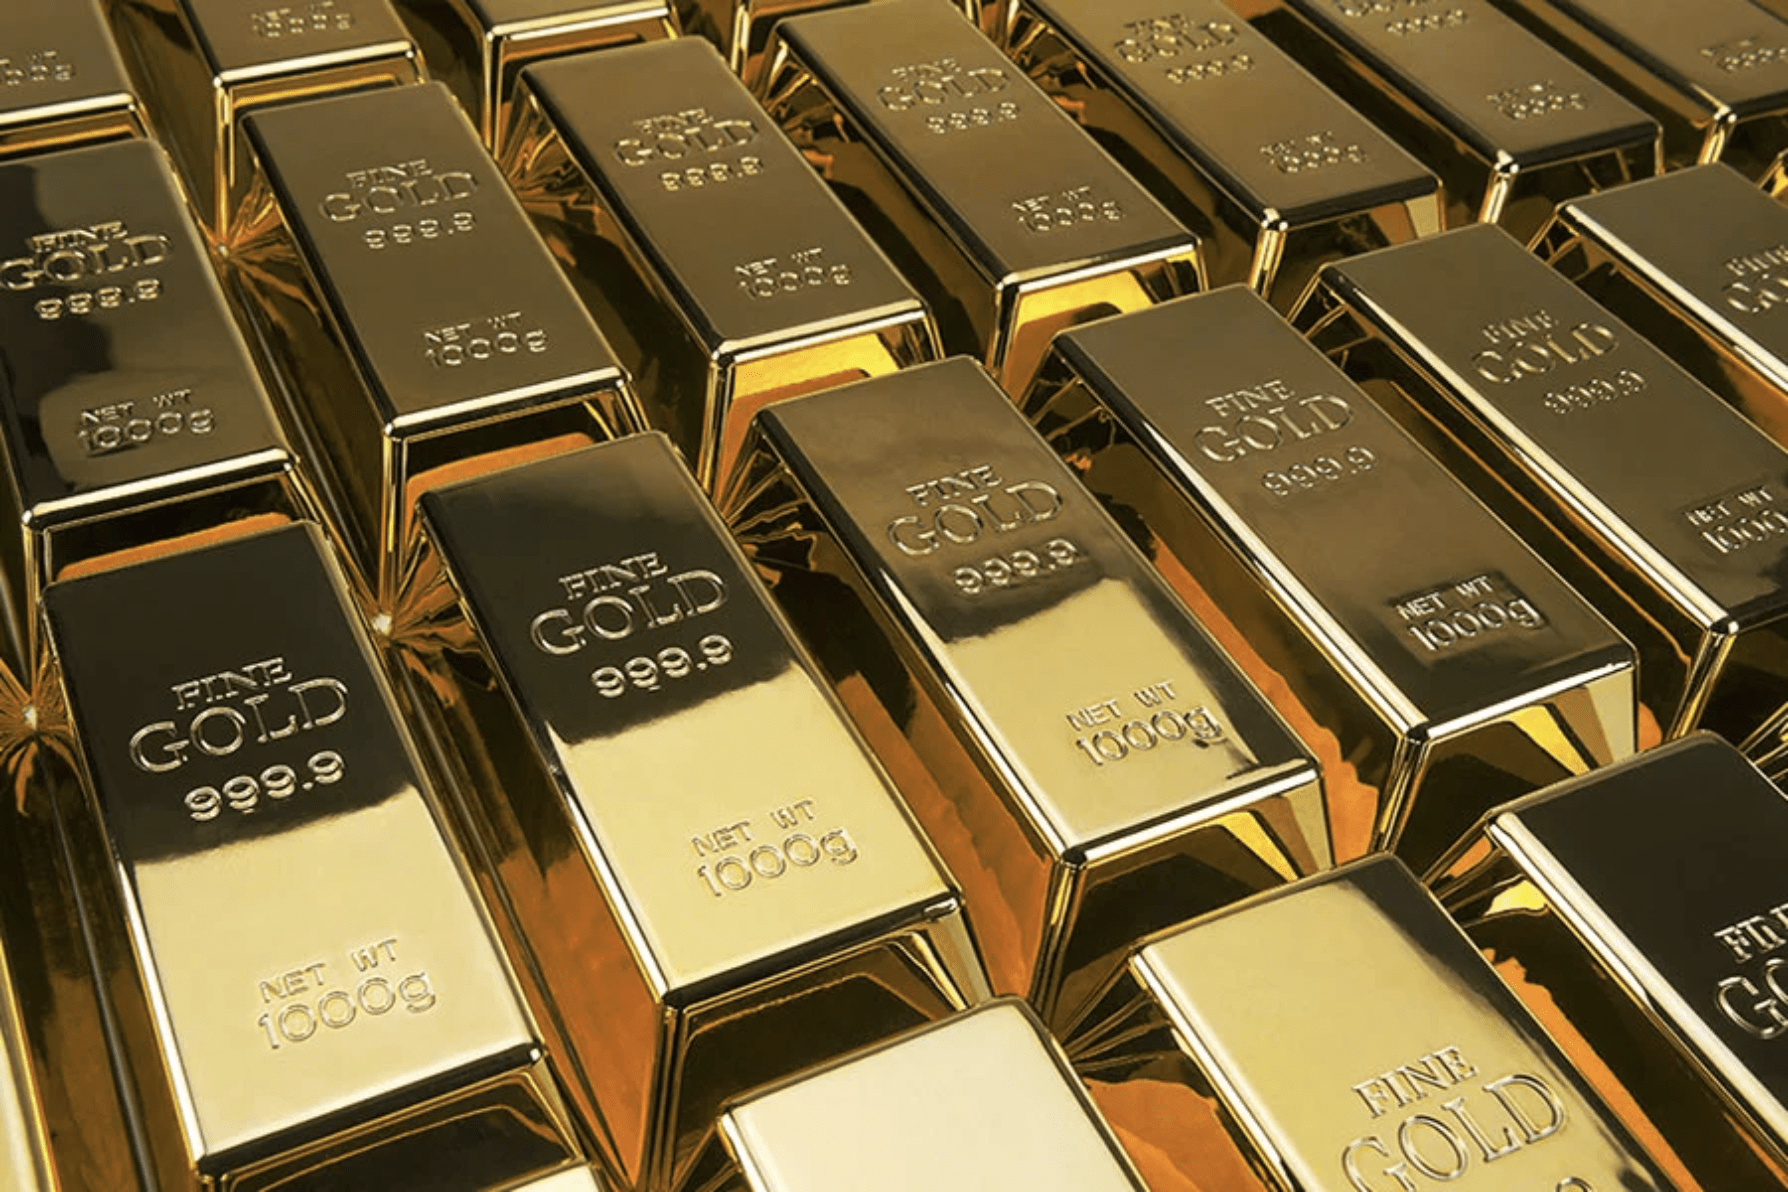 Gold IRA Investment Companies: How you can start investing in gold IRAs